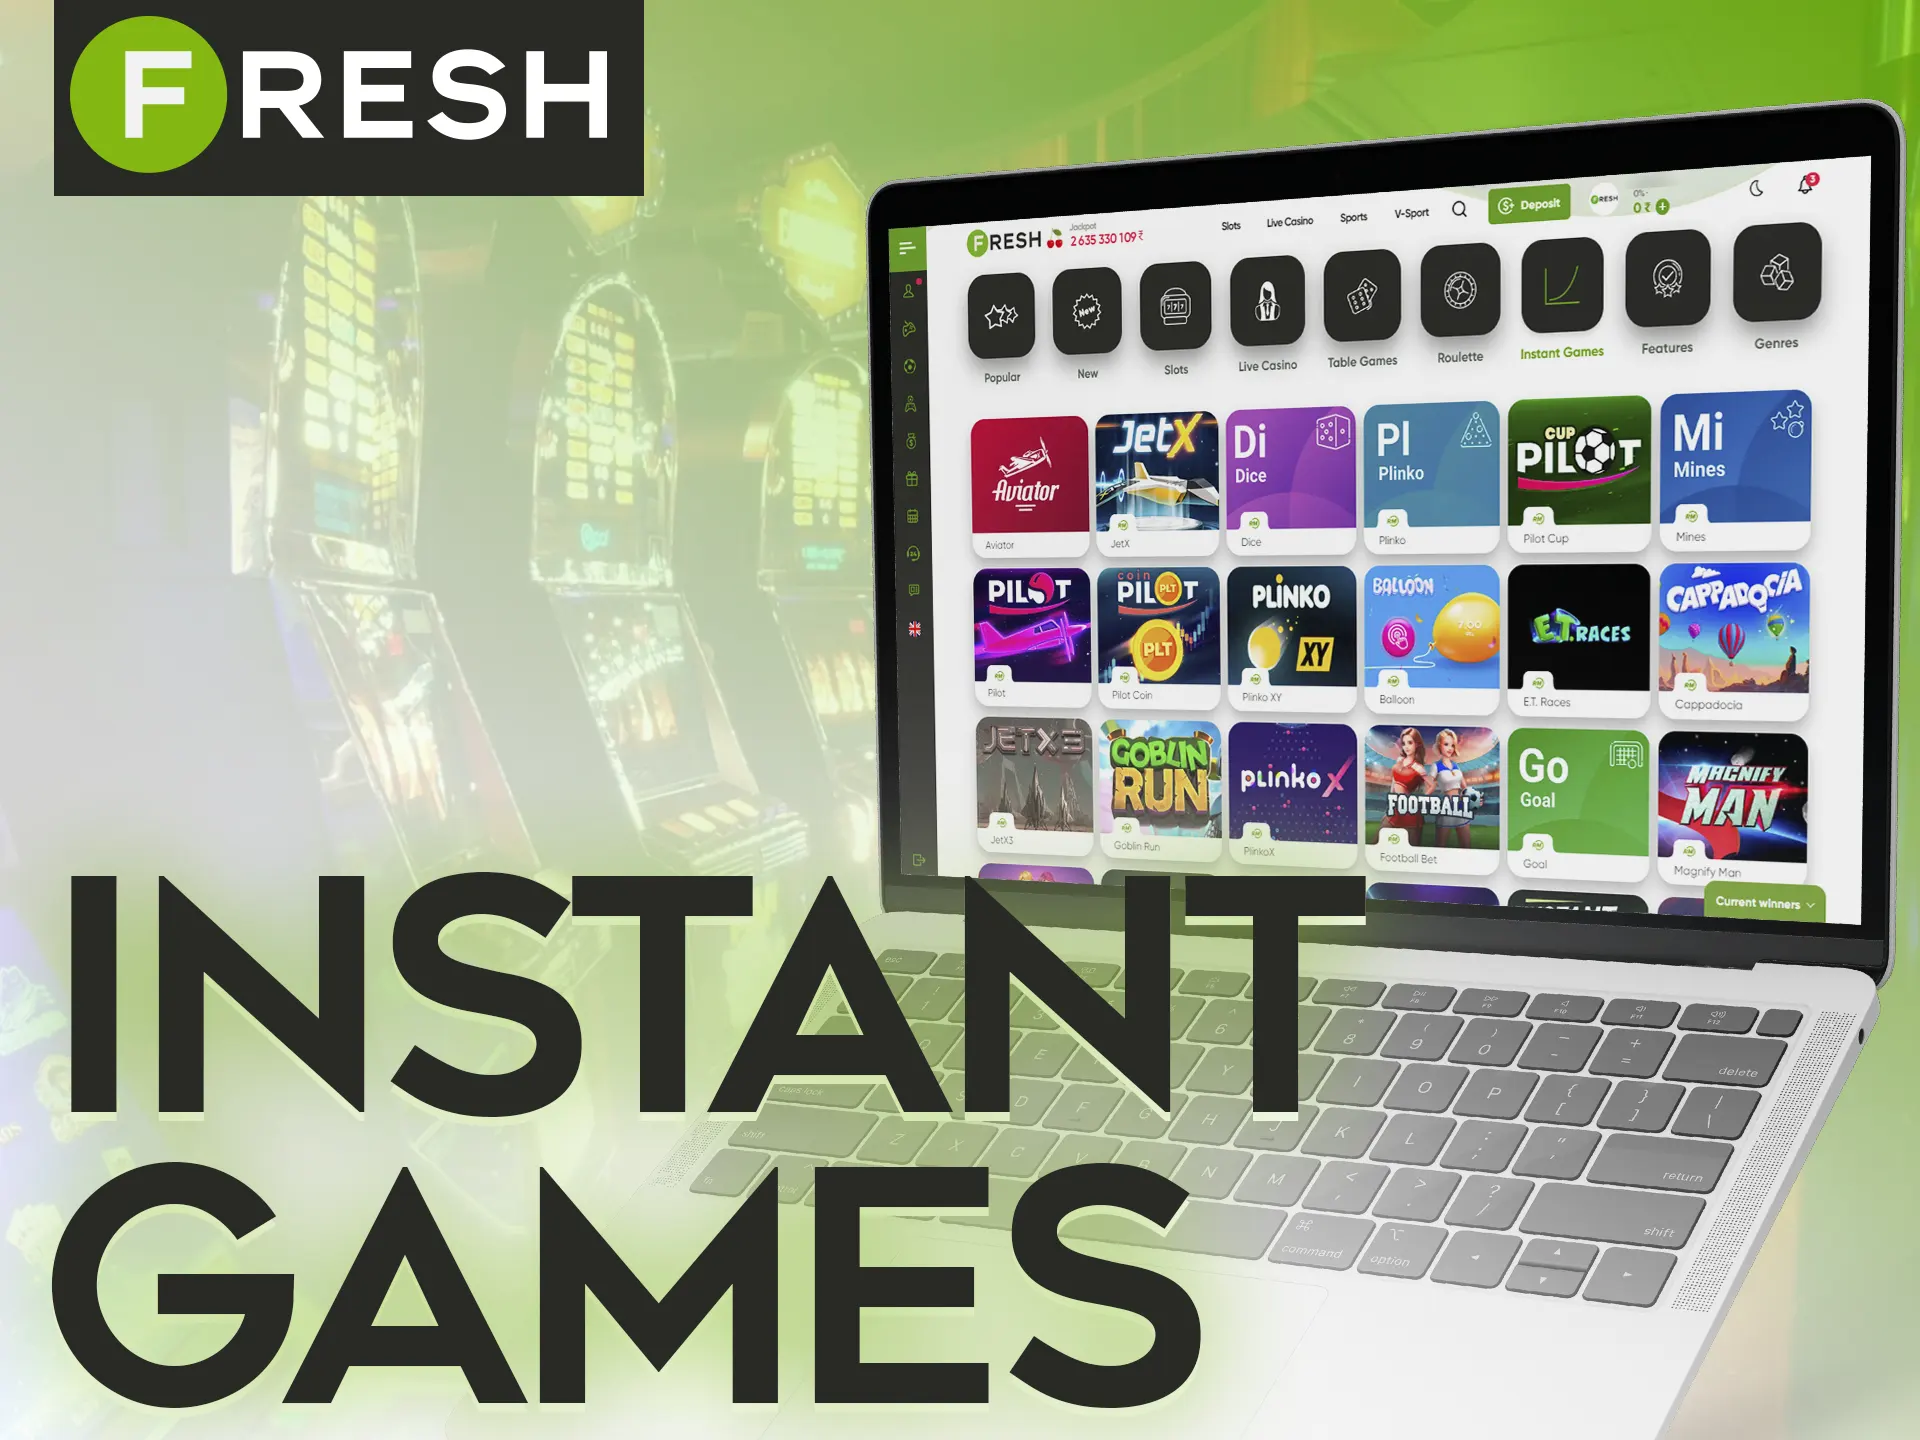 You can play instant games in the Fresh Online Casino.